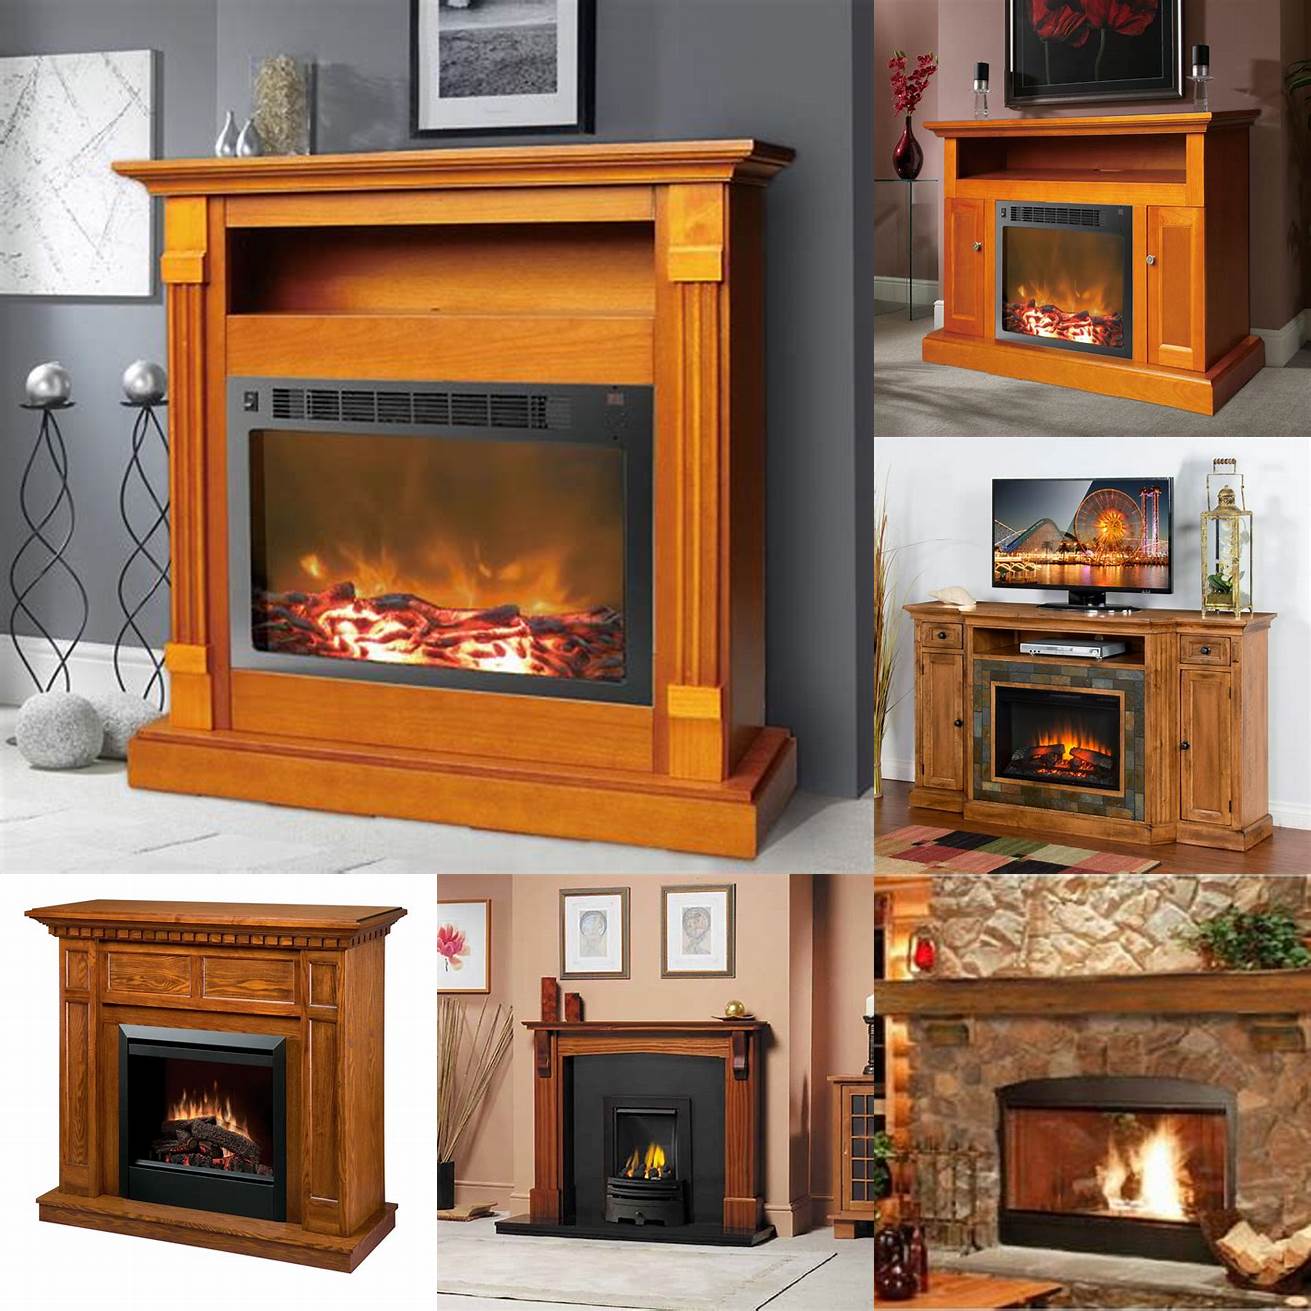 Teak Furniture with a Fireplace